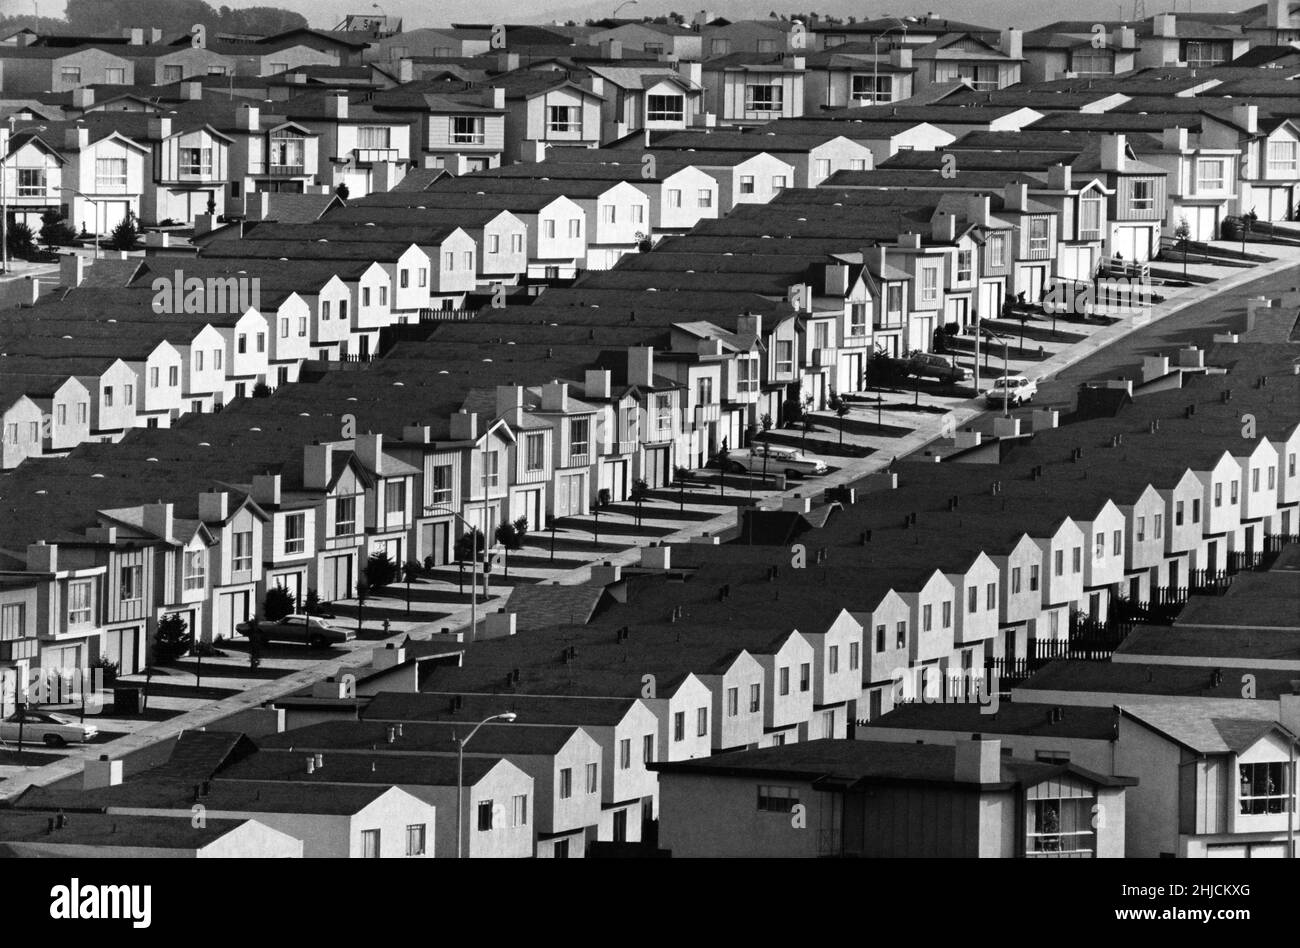 Housing development in Daly City, a suburb of San Francisco, CA founded in 1911 by John Daly a Boston businessman. Photo circa 1980. Stock Photo